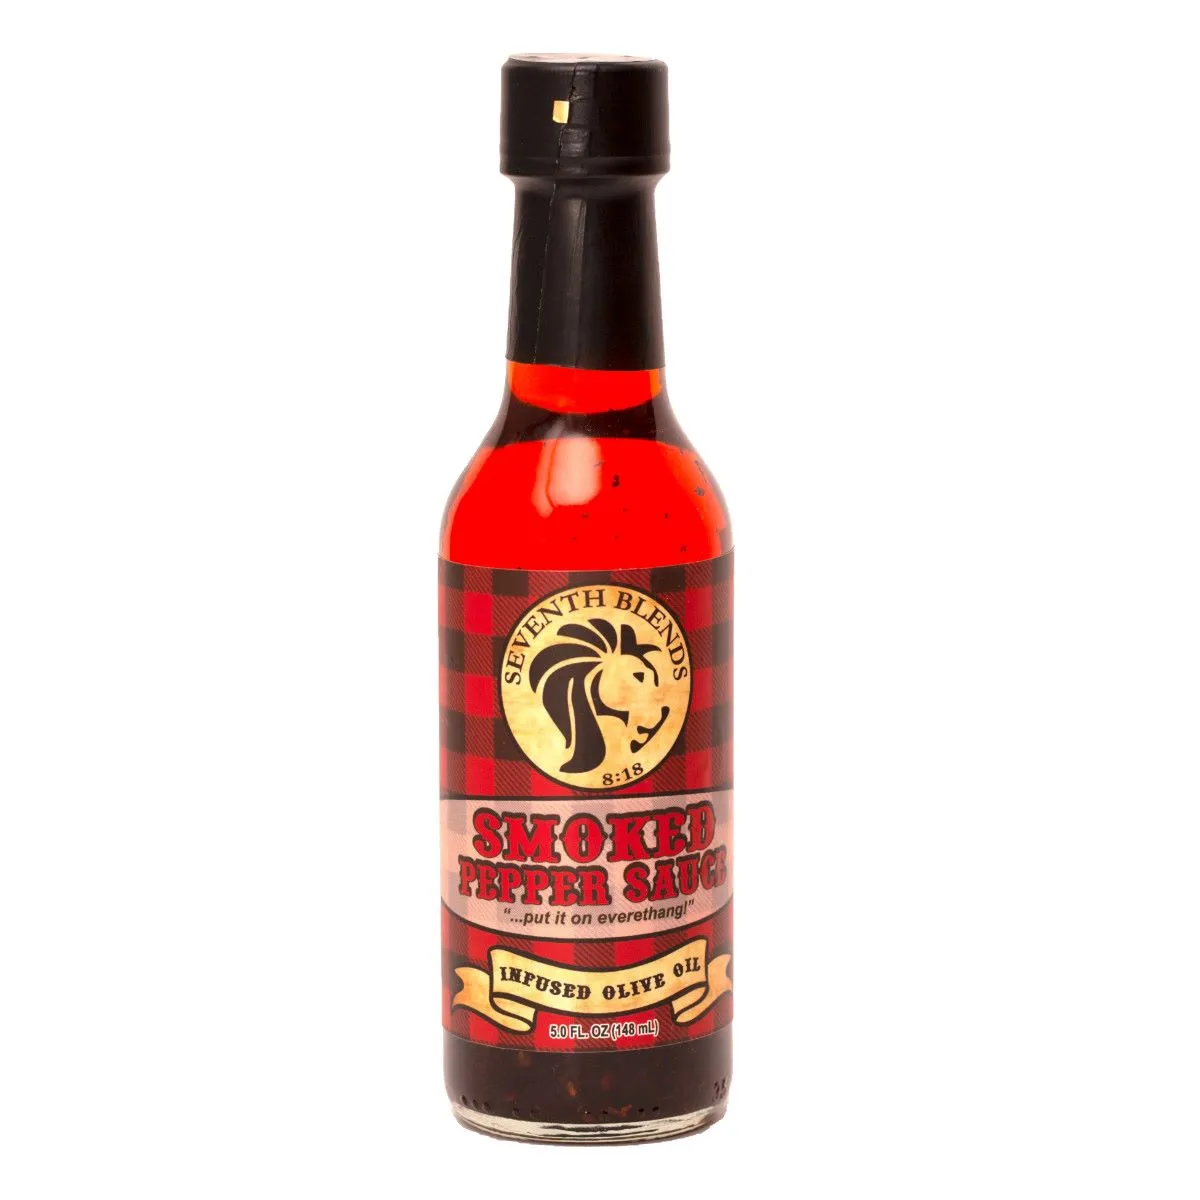 Smoked Pepper Sauce Product resized